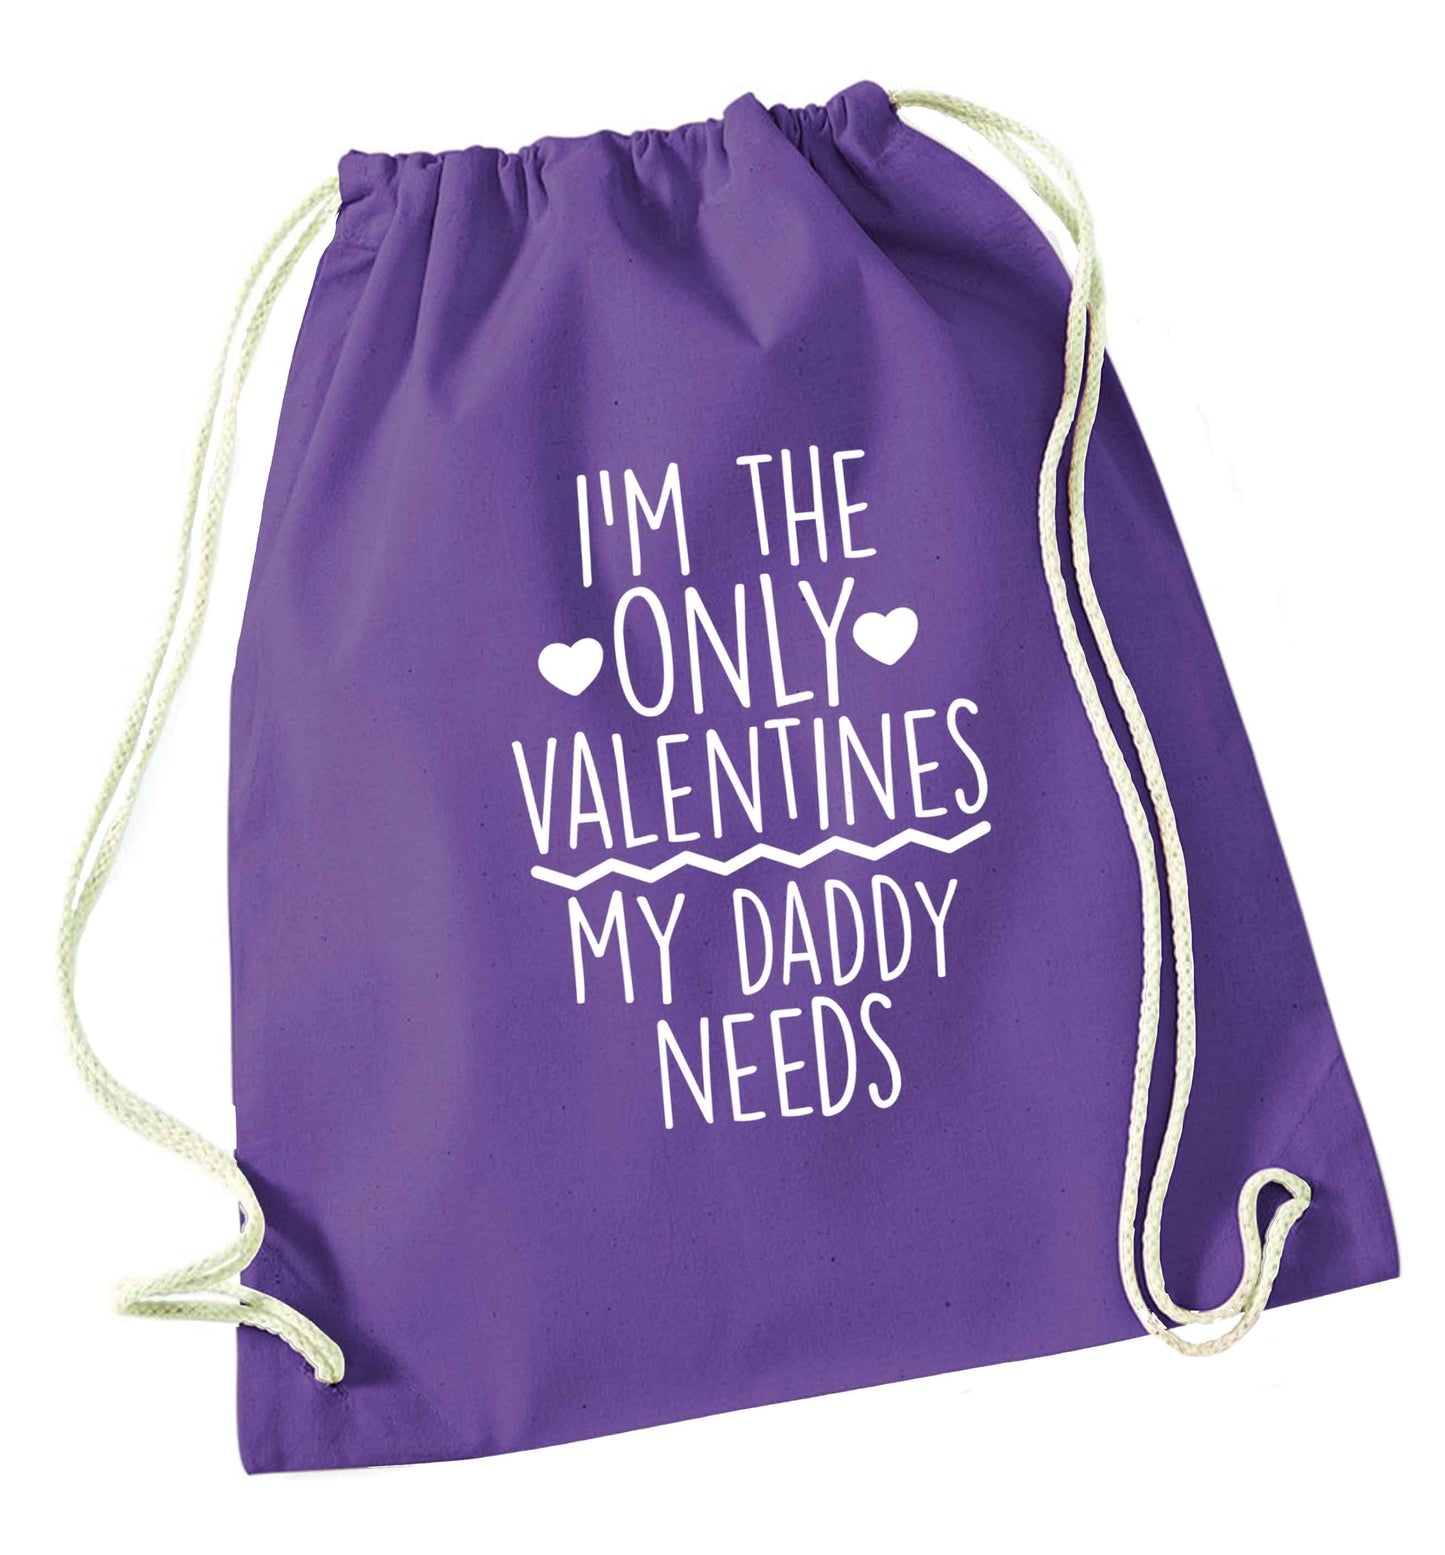 I'm the only valentines my daddy needs purple drawstring bag